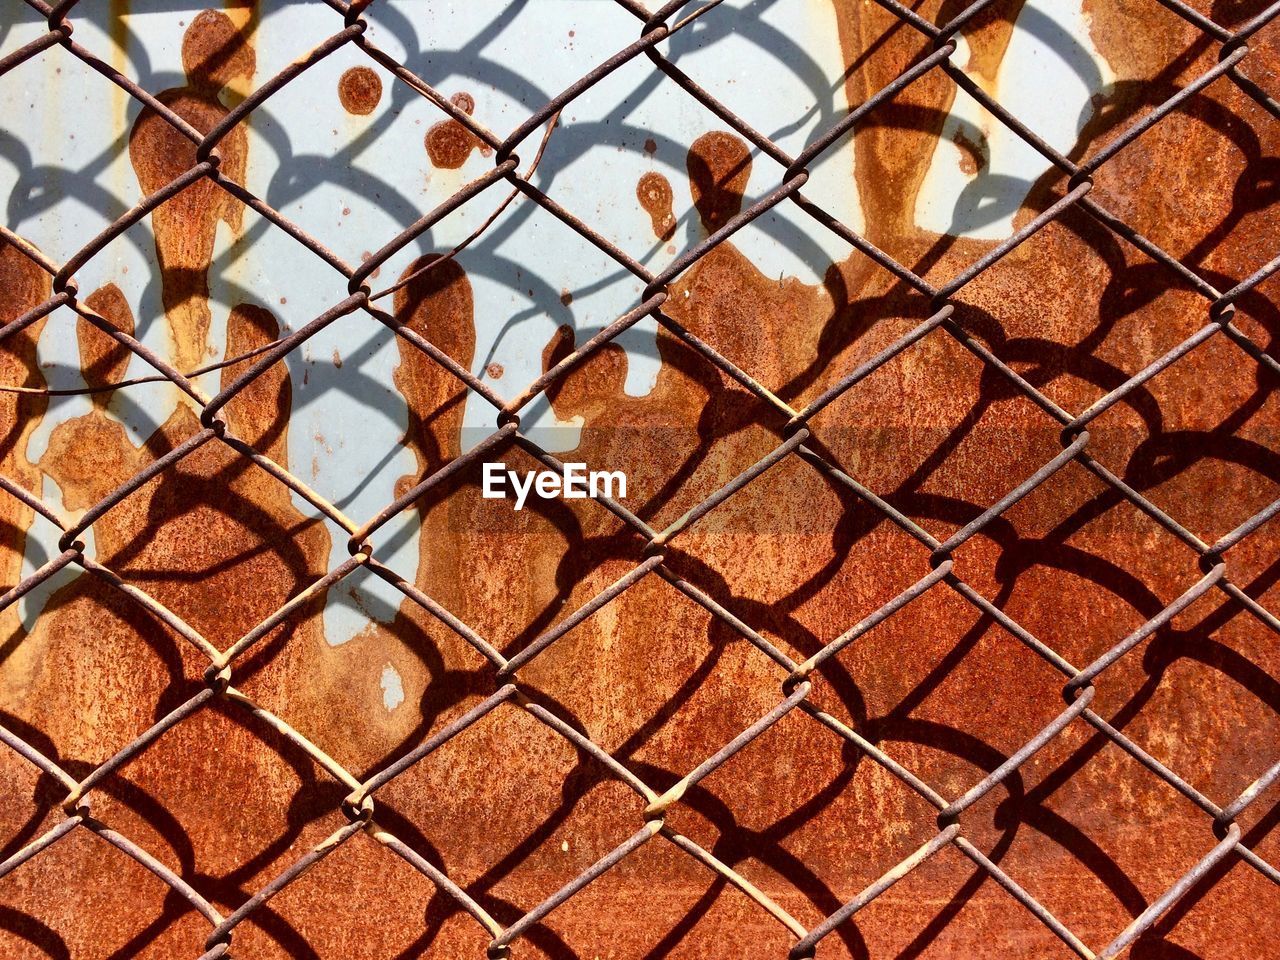 Full frame shot of chainlink fence against rusty wall